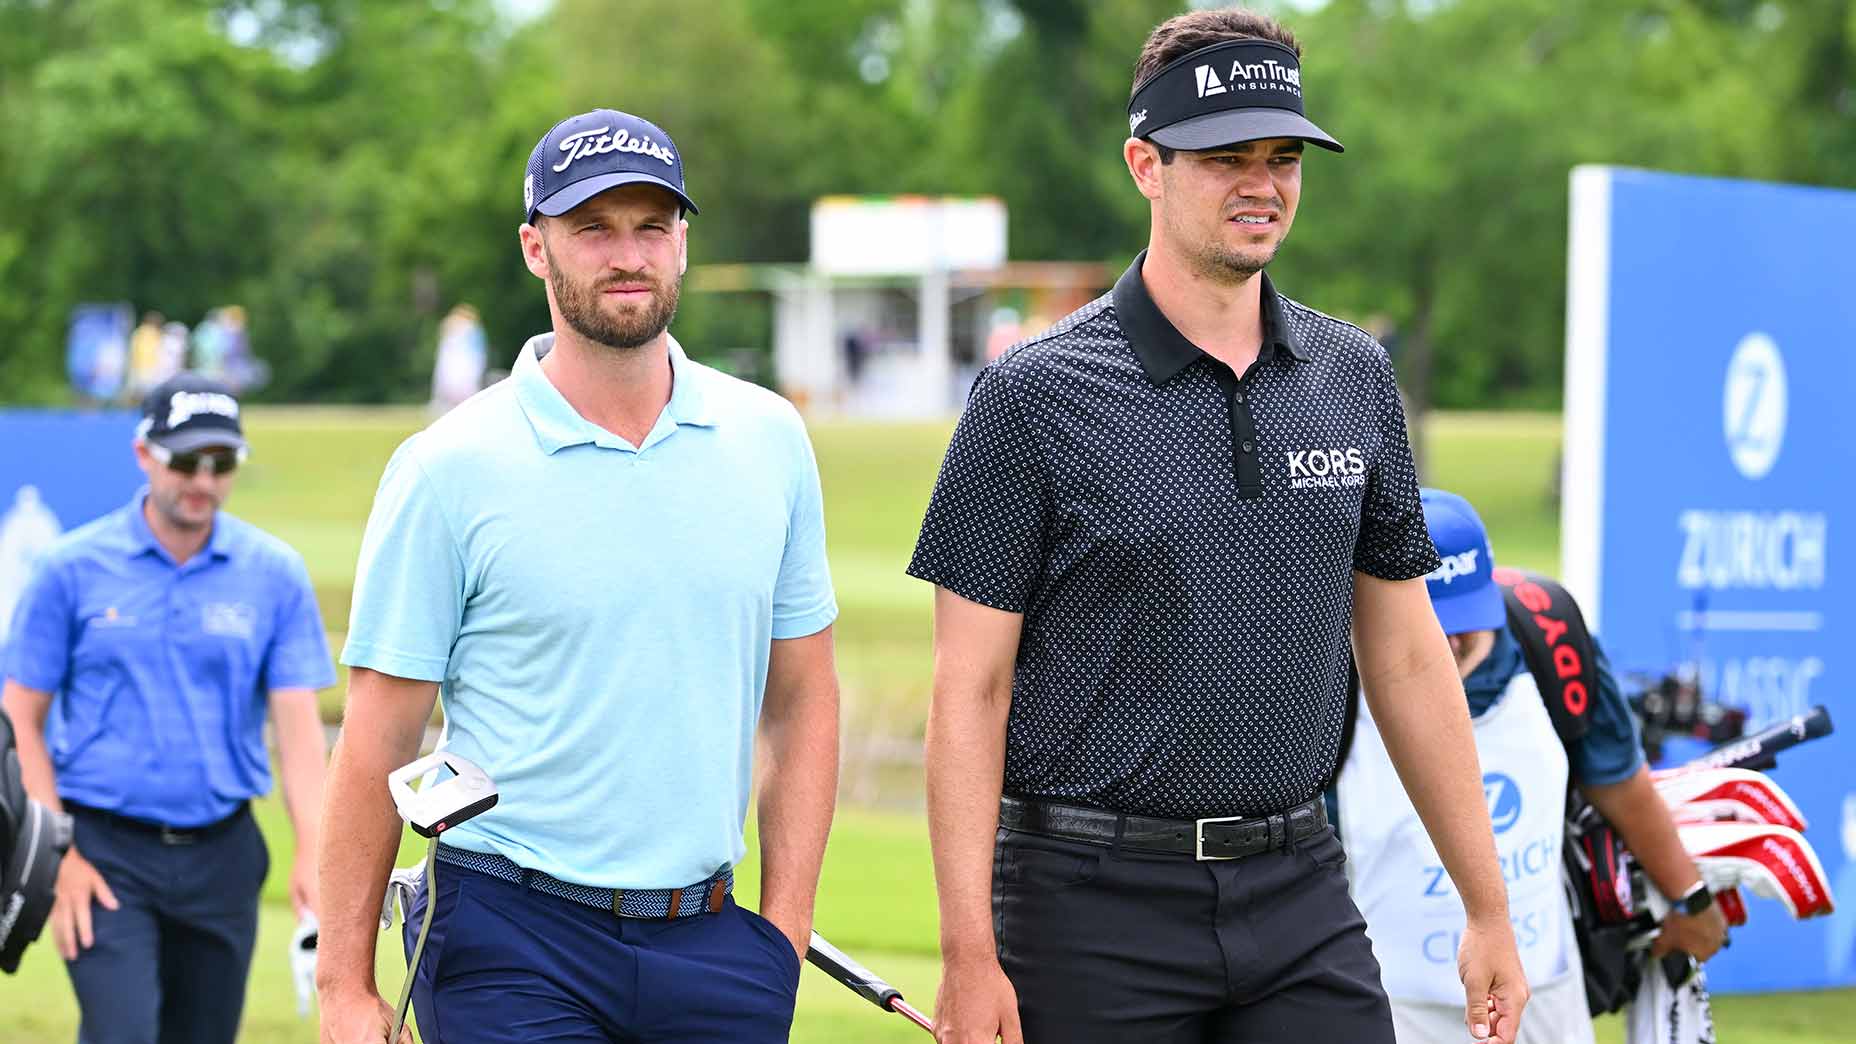 2023 Zurich Classic: How to watch schedule, streaming